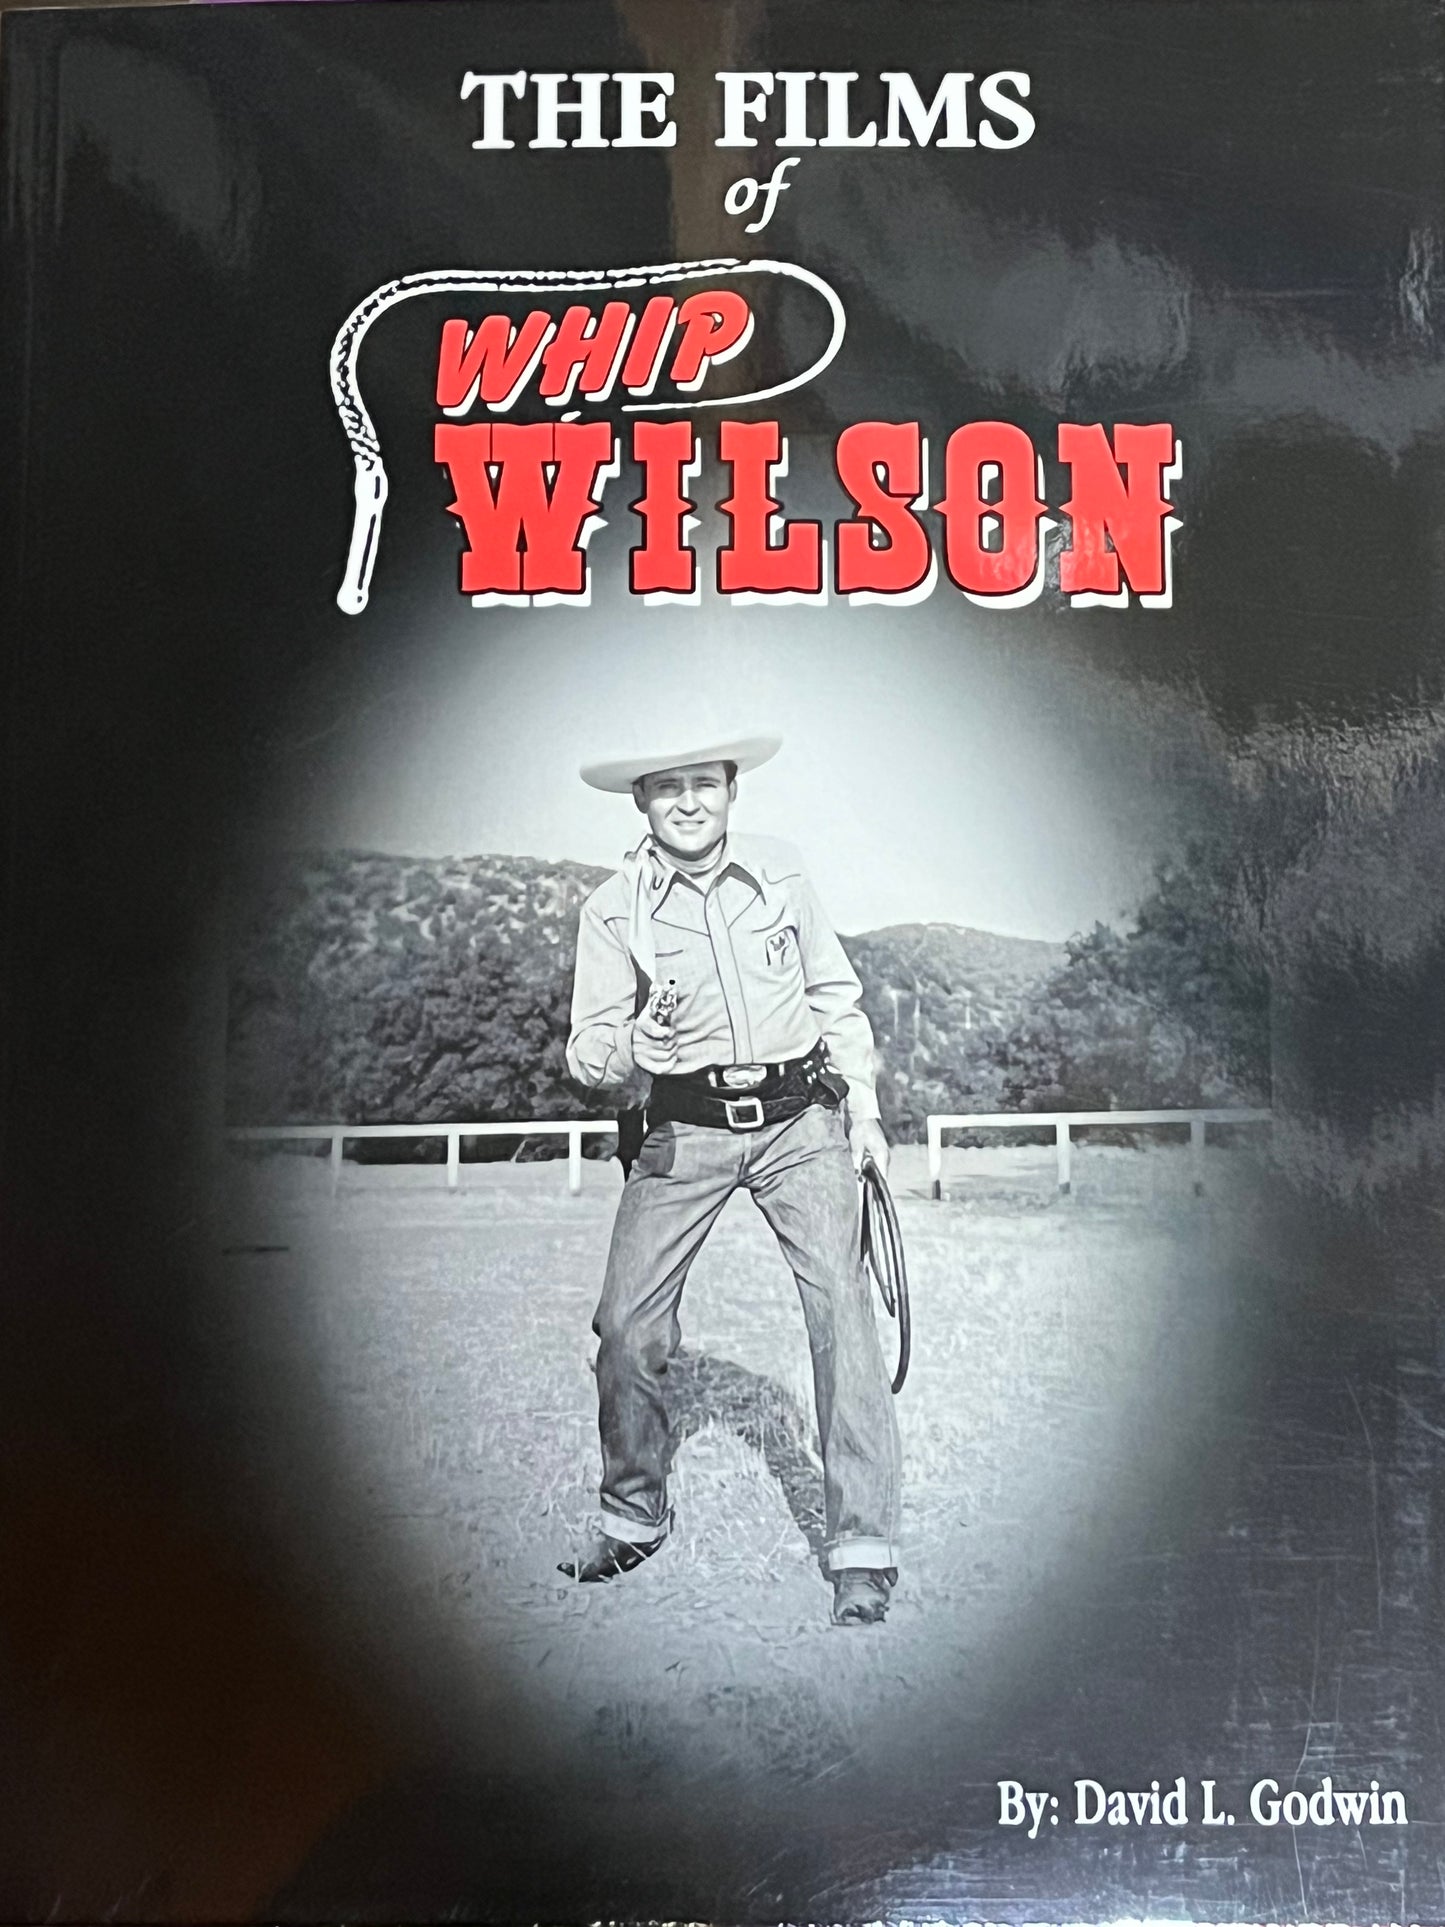 THE FILMS OF WHIP WILSON by David Godwin (autograph)